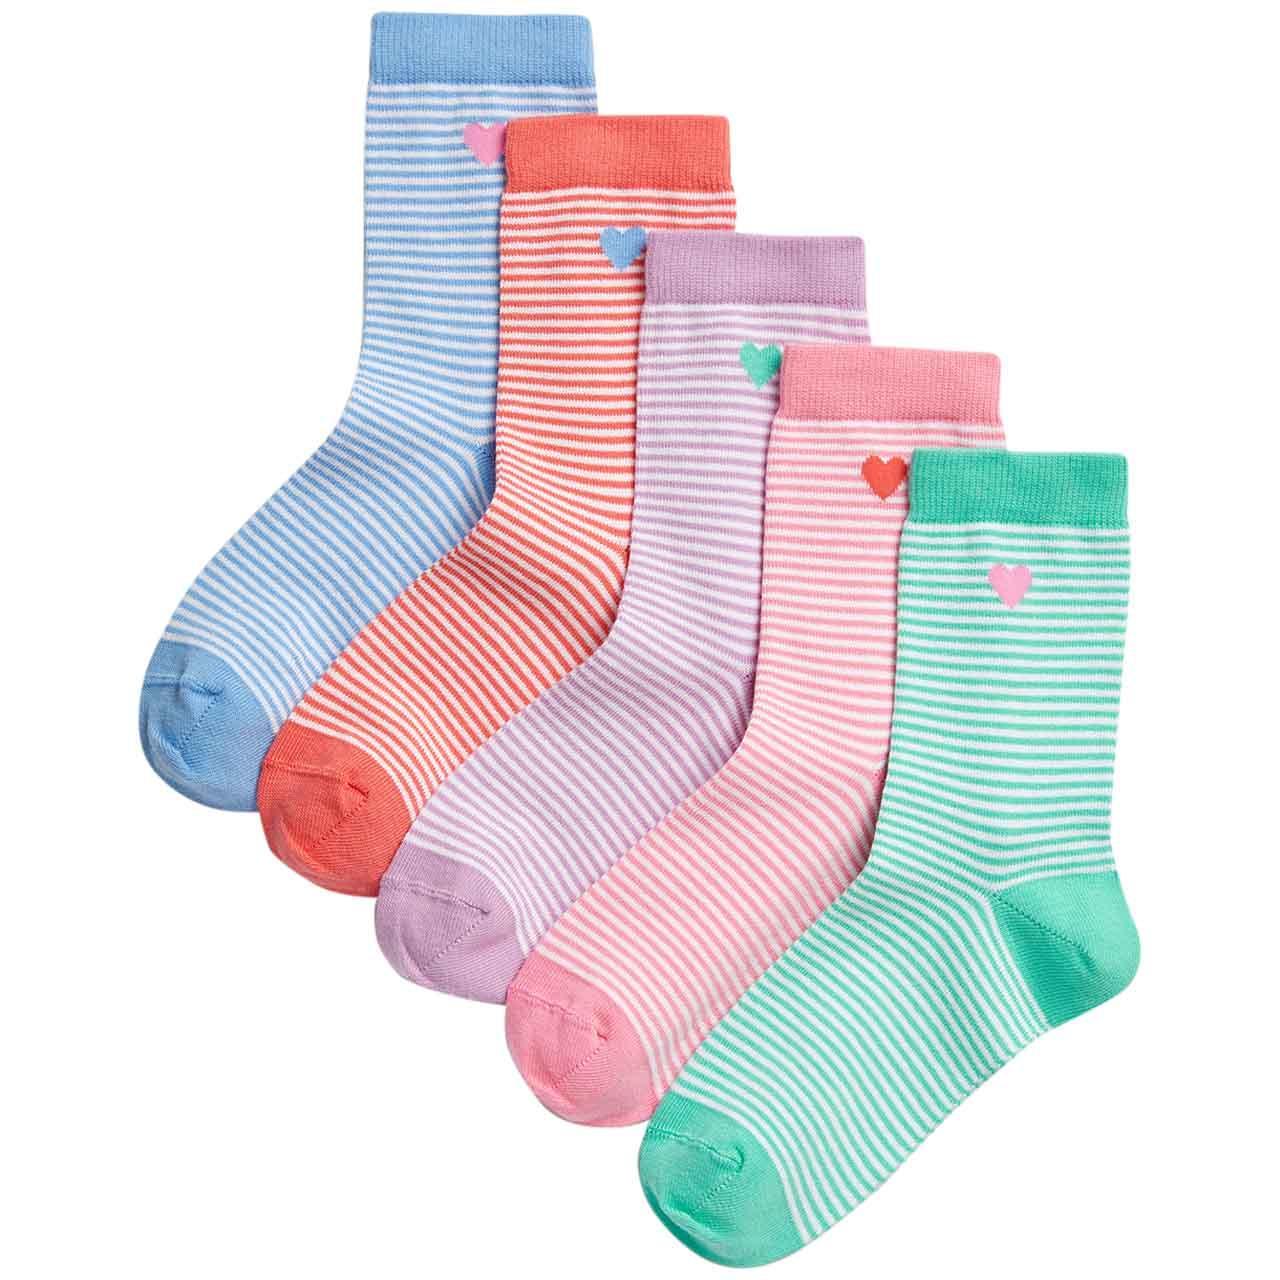 M&S Girls Cotton Rich Striped Socks, 6-8.5 Small, 5 Pack